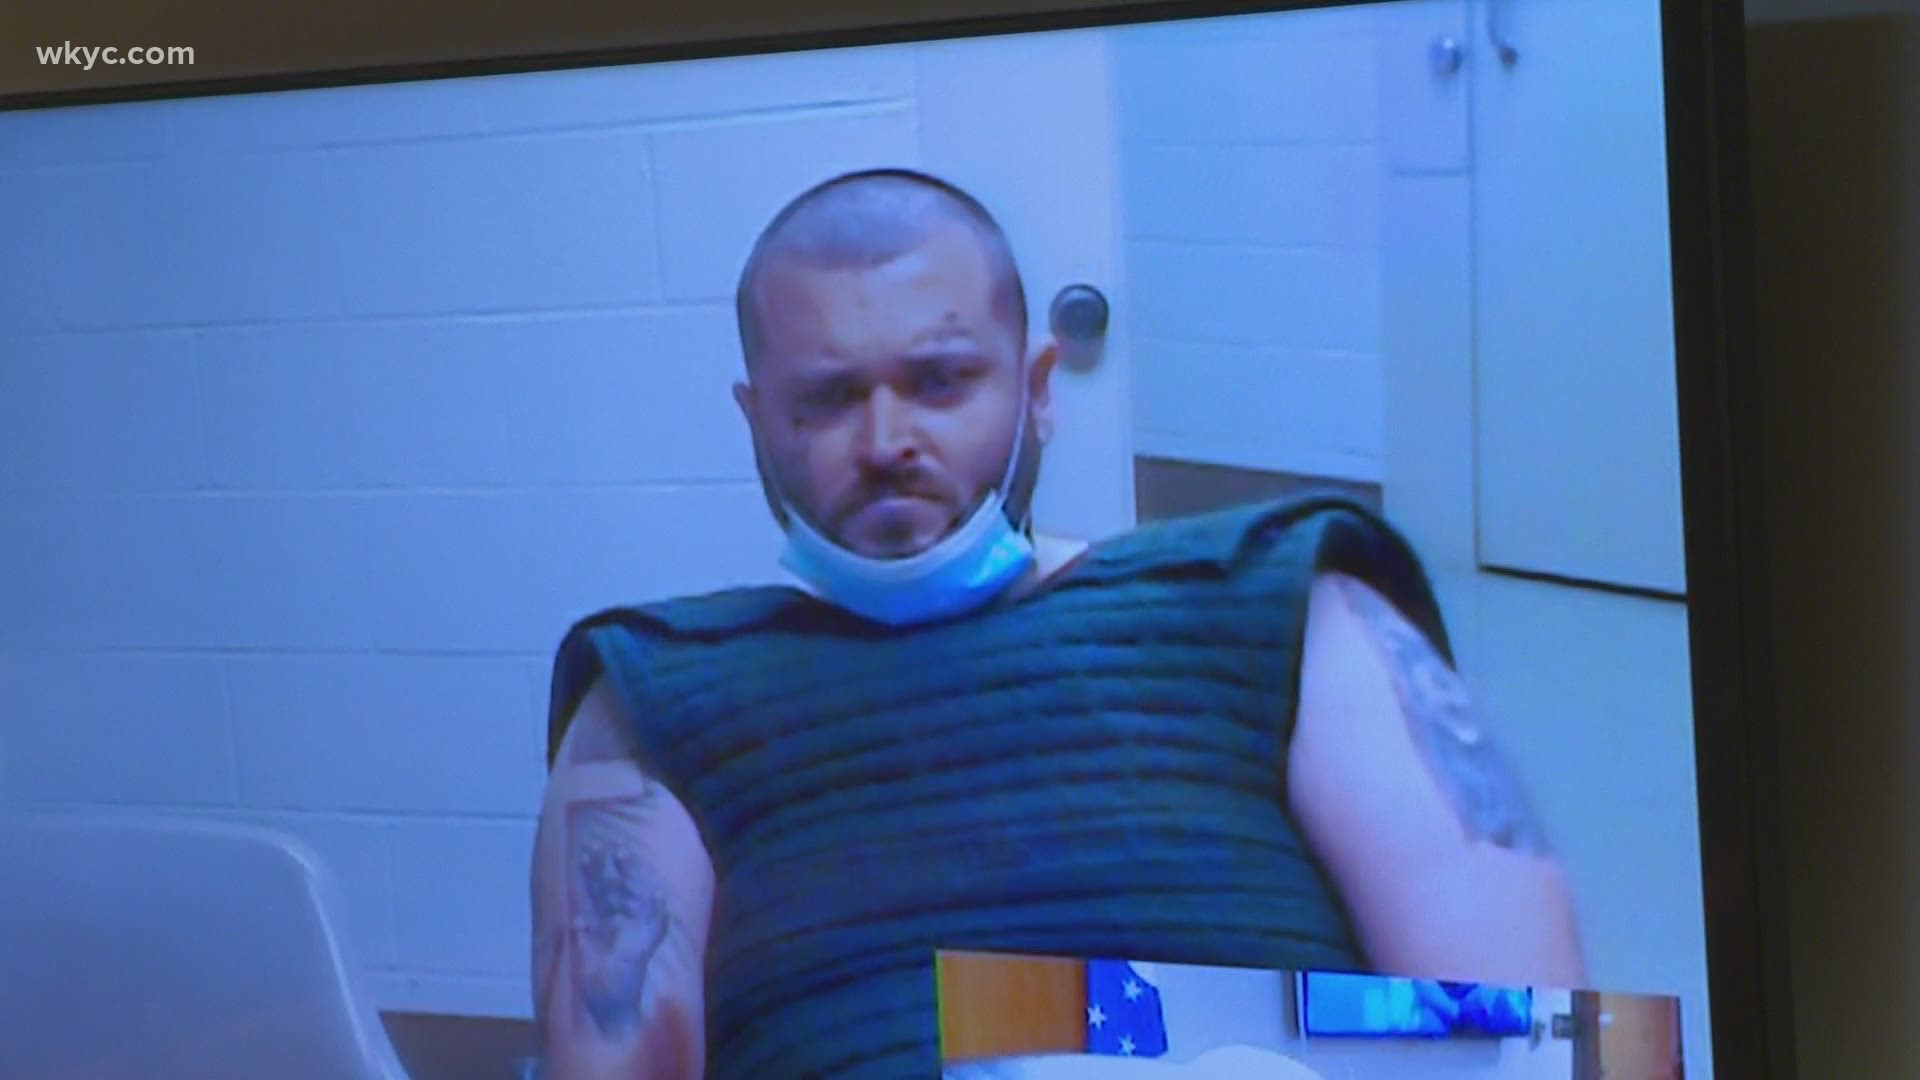 March 29, 2021: Matthew J. Ponomarenko, who has been charged with one count of aggravated murder in the case, appeared in Parma Municipal Court via video.